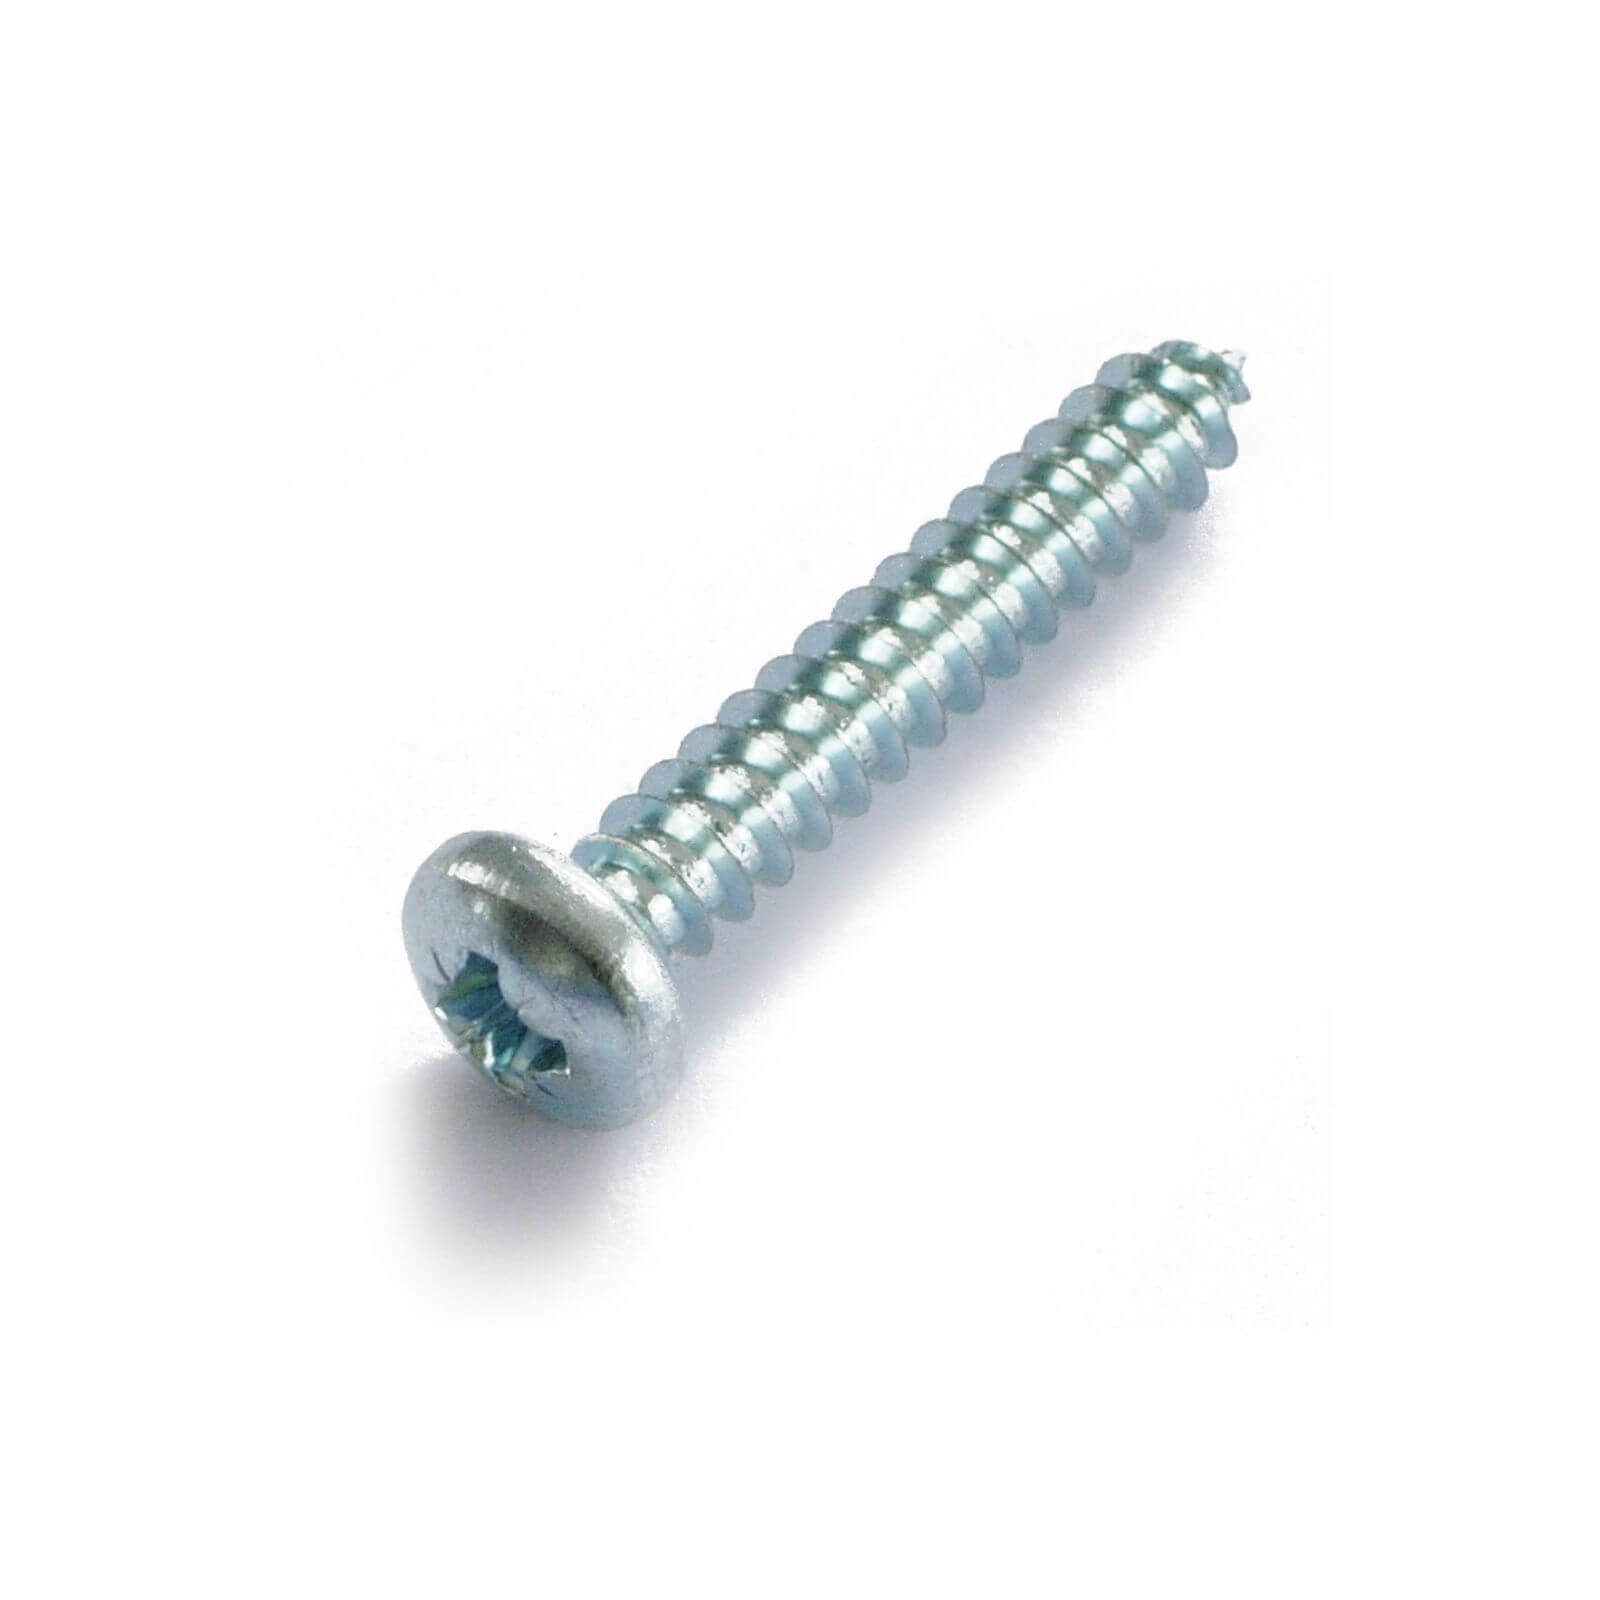 Self Tapping Screw - Bright Zinc Plated - 3.5 x 20mm - 10 Pack